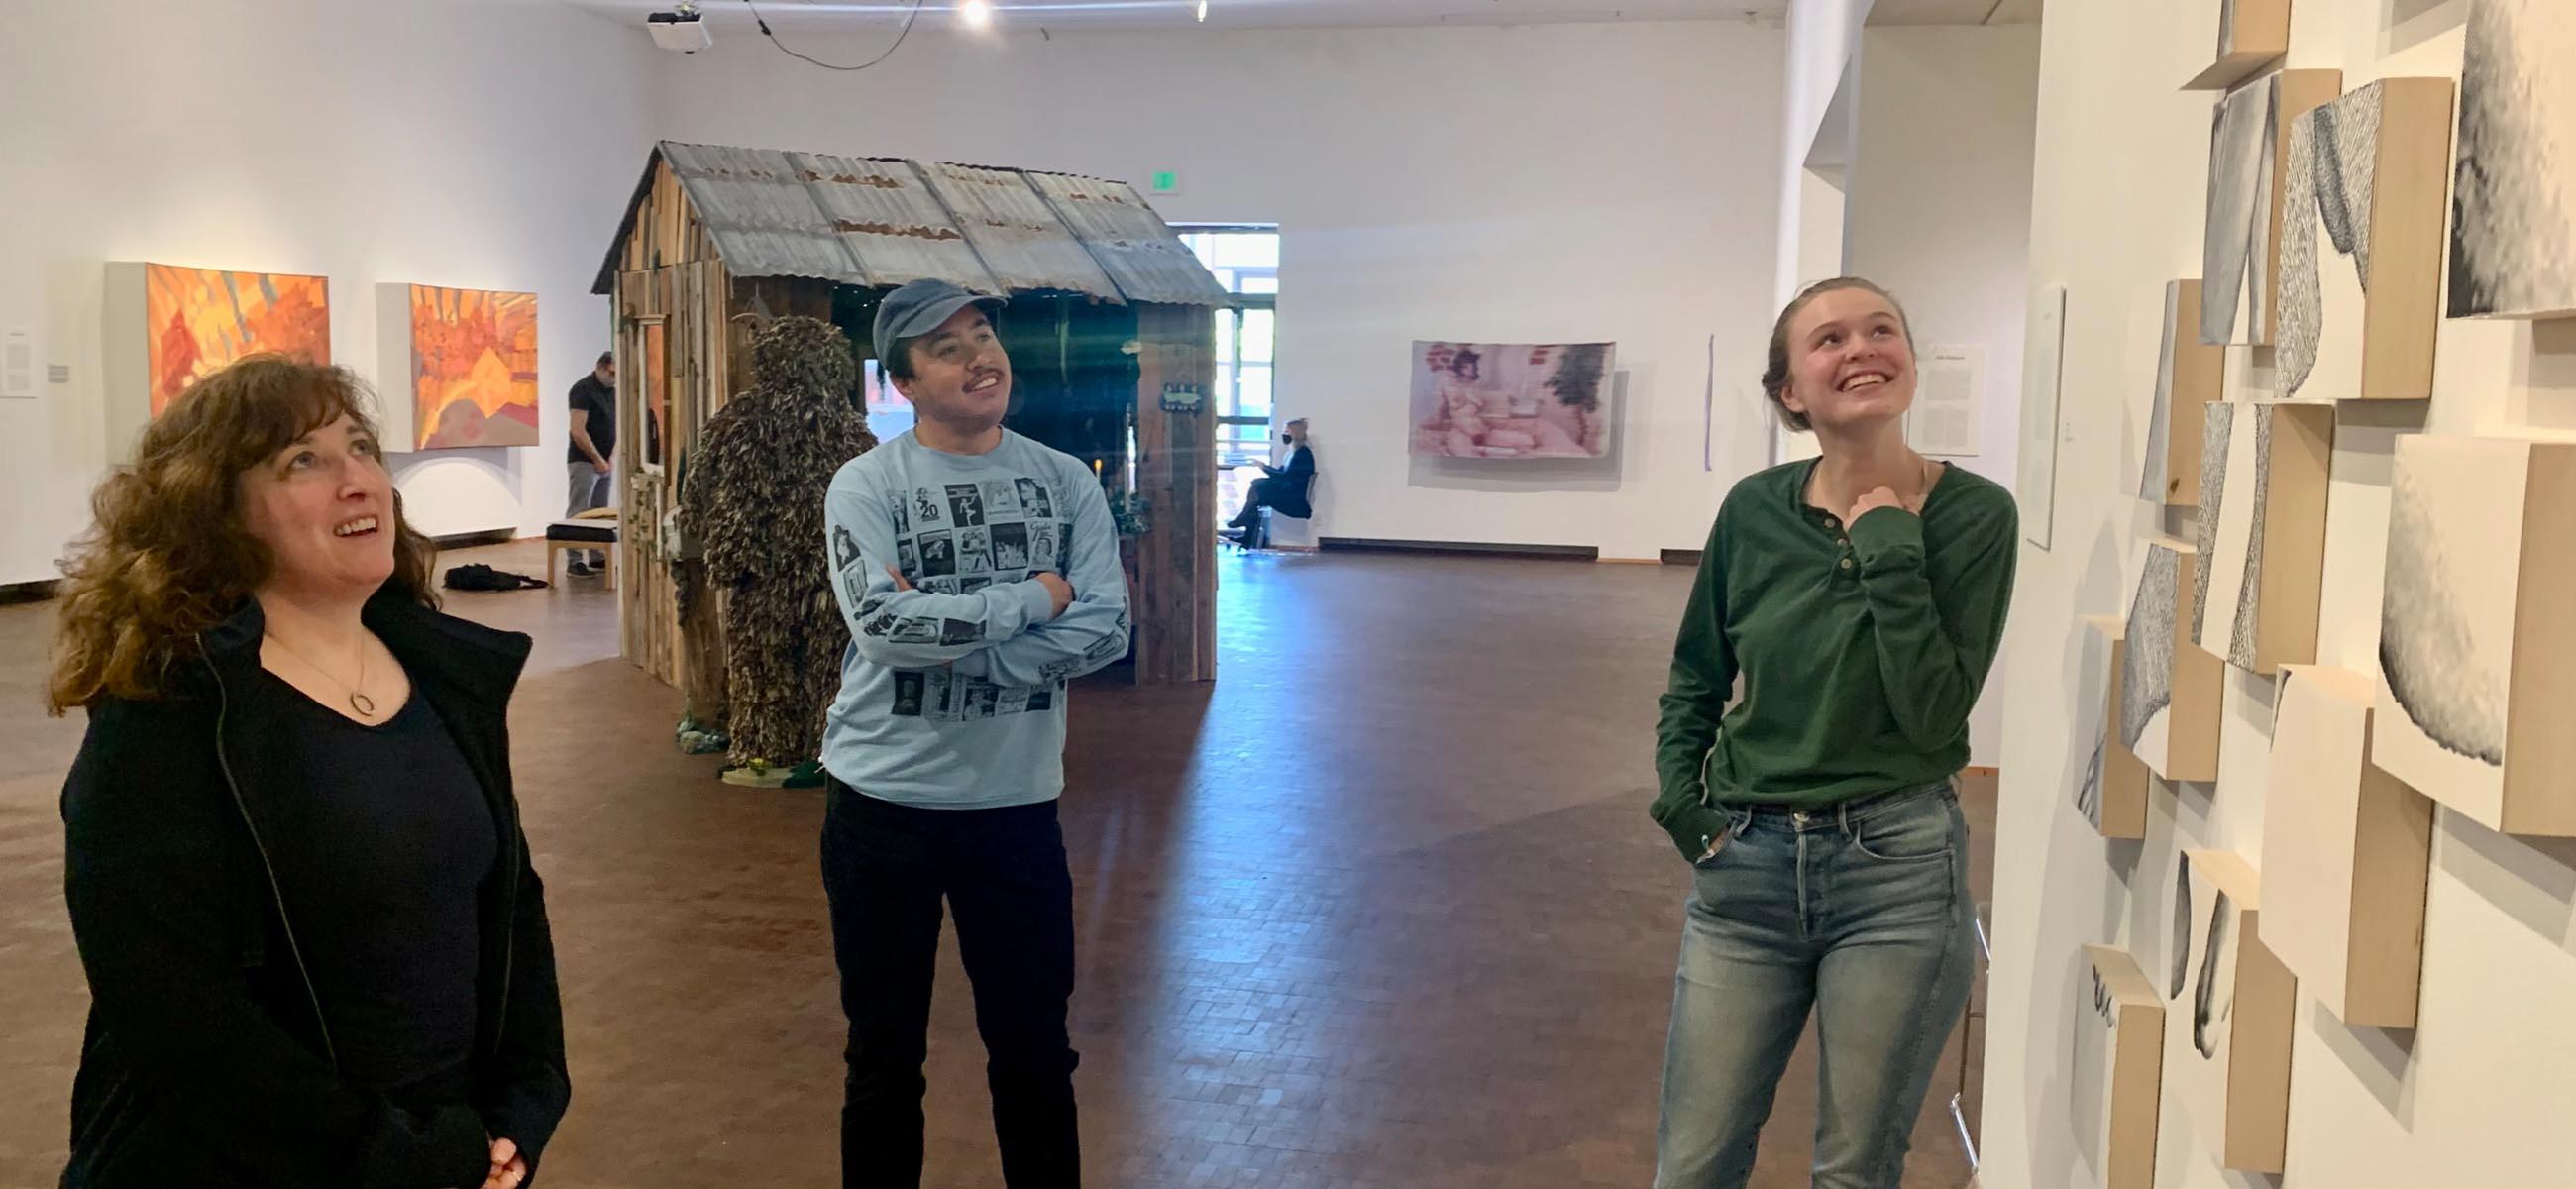 three smiling people look up at a group of artworks on the wall.